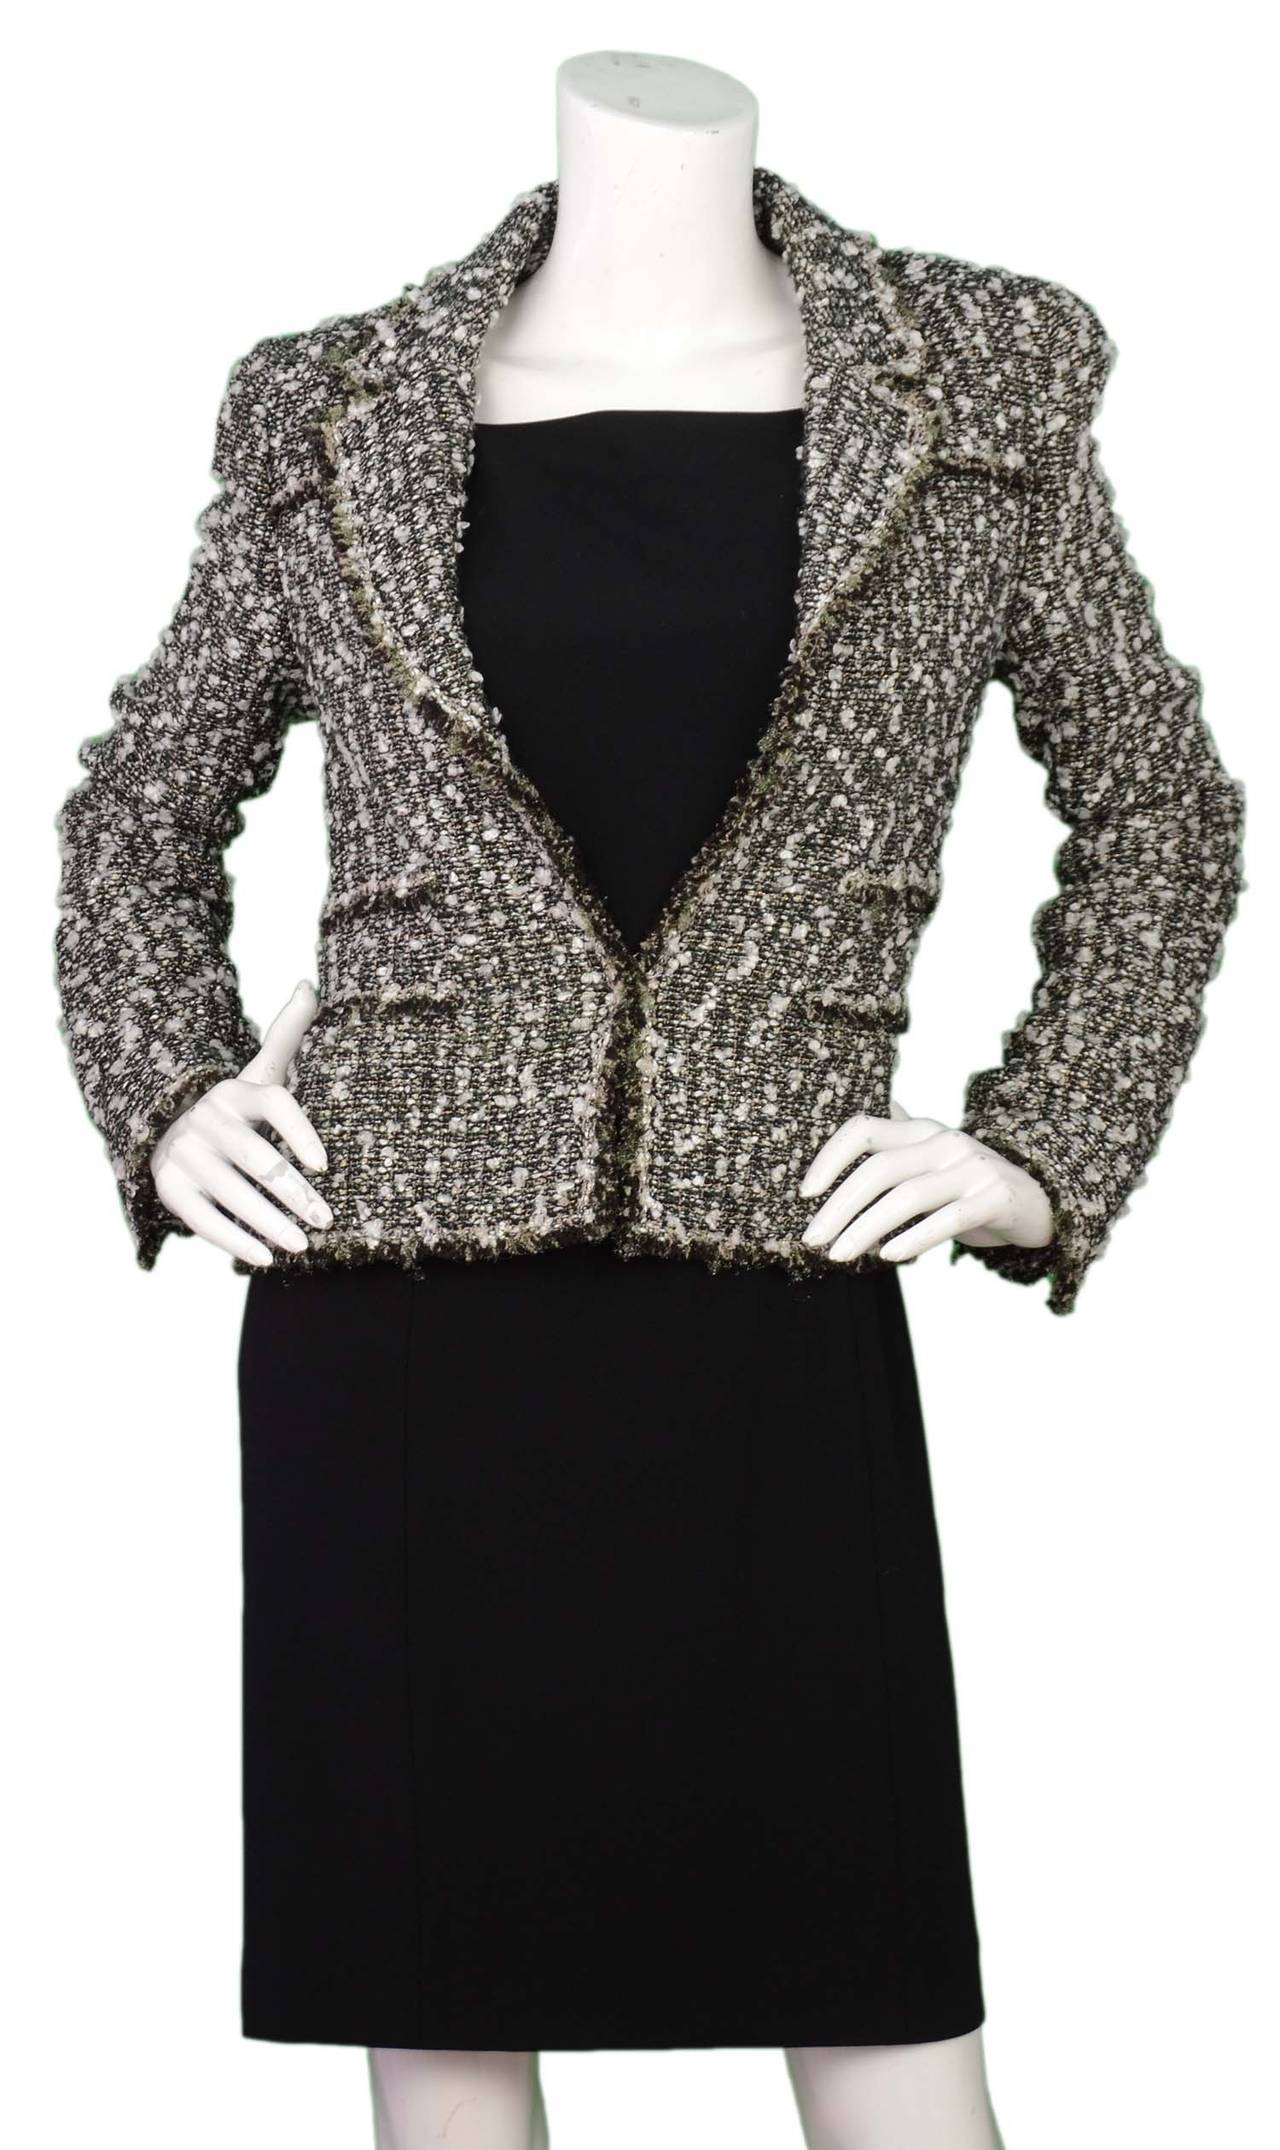 Chanel 2004 Black/White/Green Tweed Jacket sz 36
Features tinsel- like thread woven throughout to create a sparkle effect

    Made in: France
    Year of Production: 2004
    Color: Black, white, green and grey
    Composition: 46% rayon, 27%